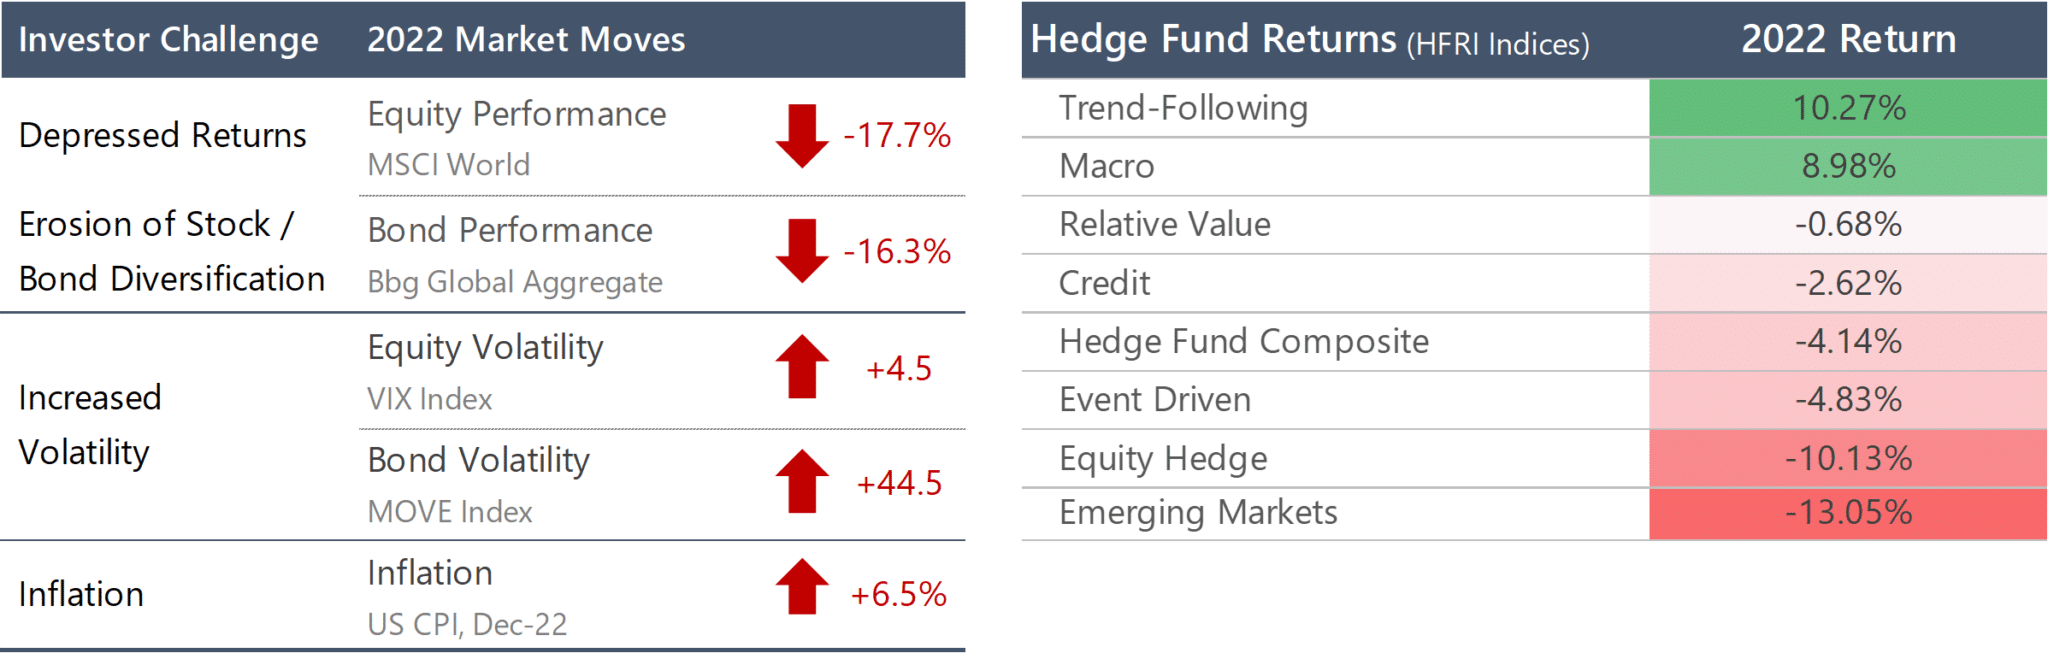 2022 Case Study: Comparison of Macro to Hedge Fund Styles